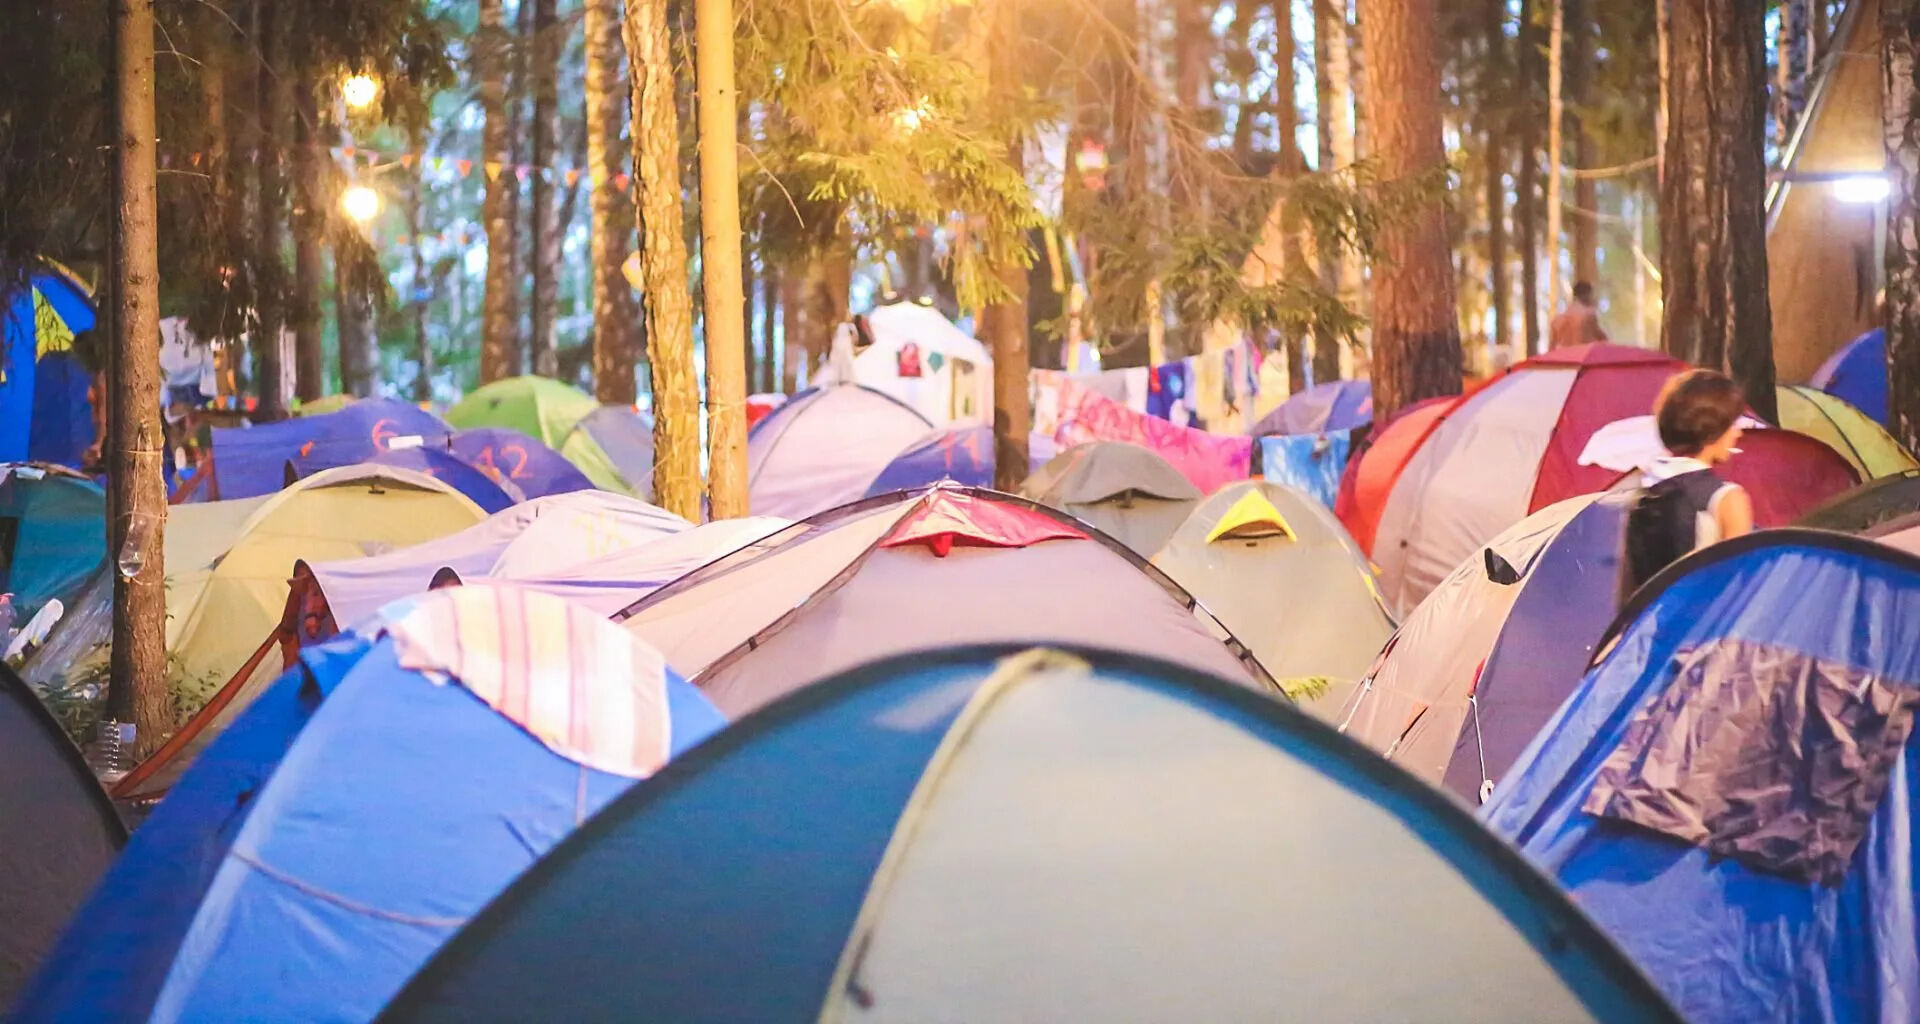 Bonnaroo Camping Packing List: 47 Essentials For The Ultimate Experience